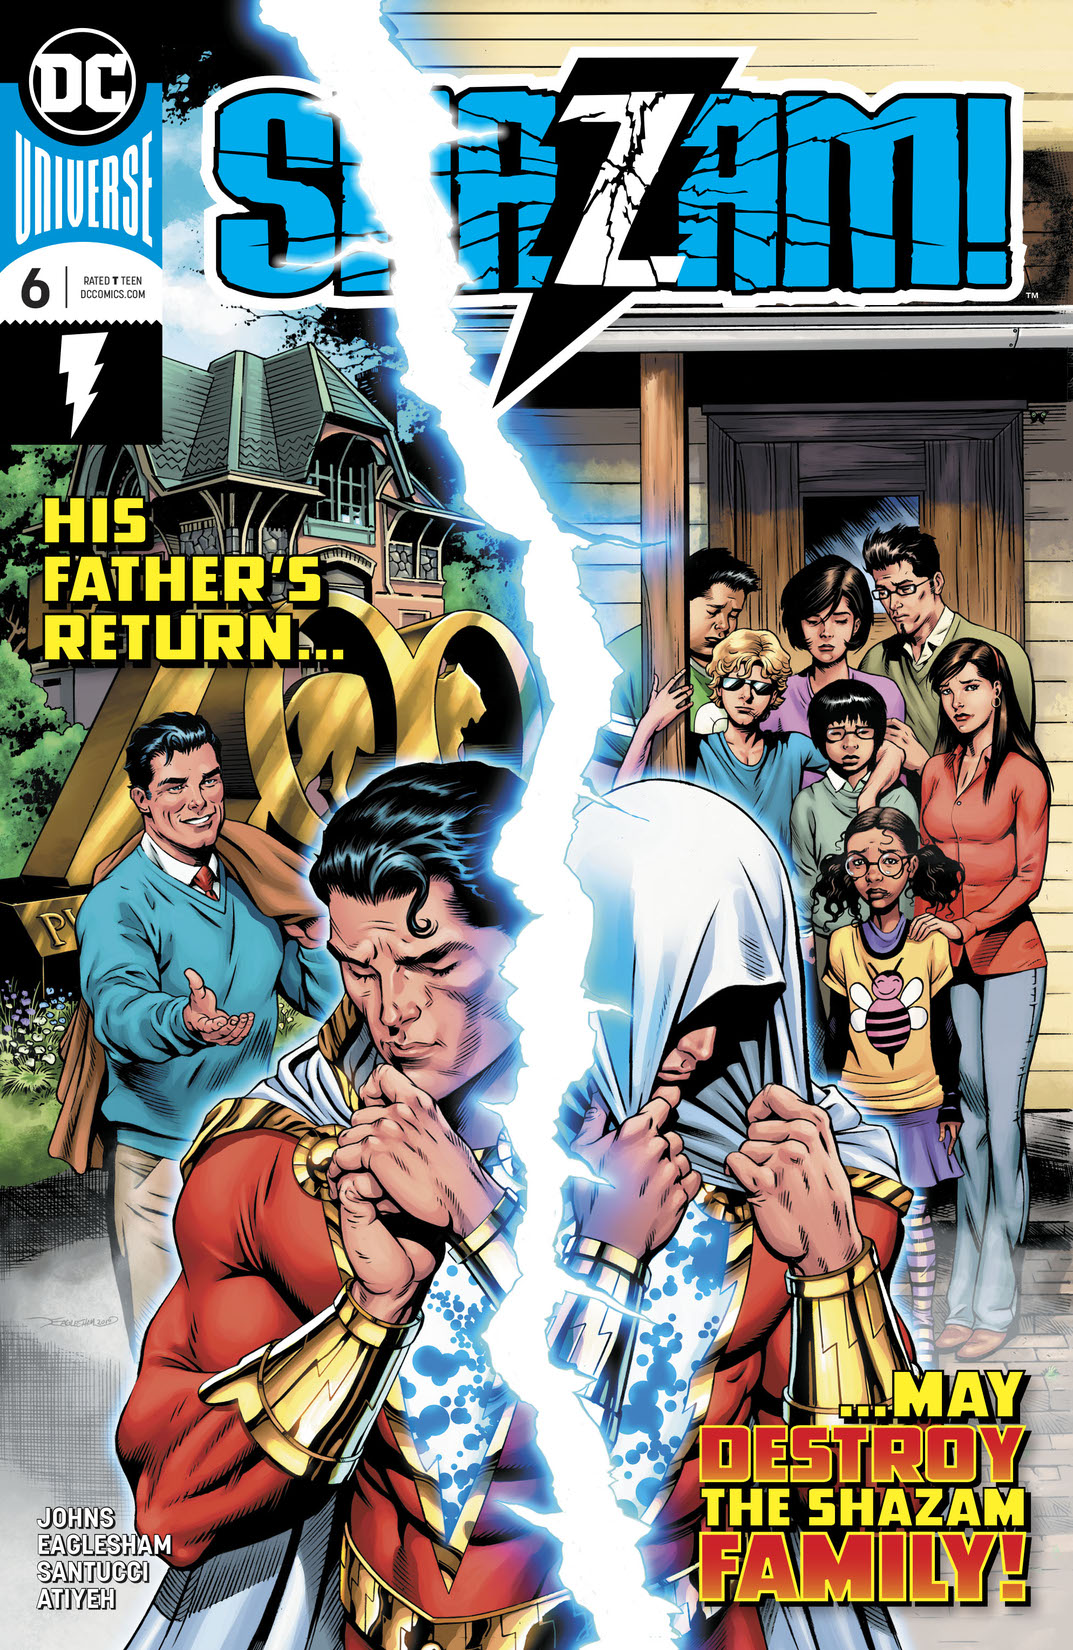 Shazam! (2018-) #6 preview images